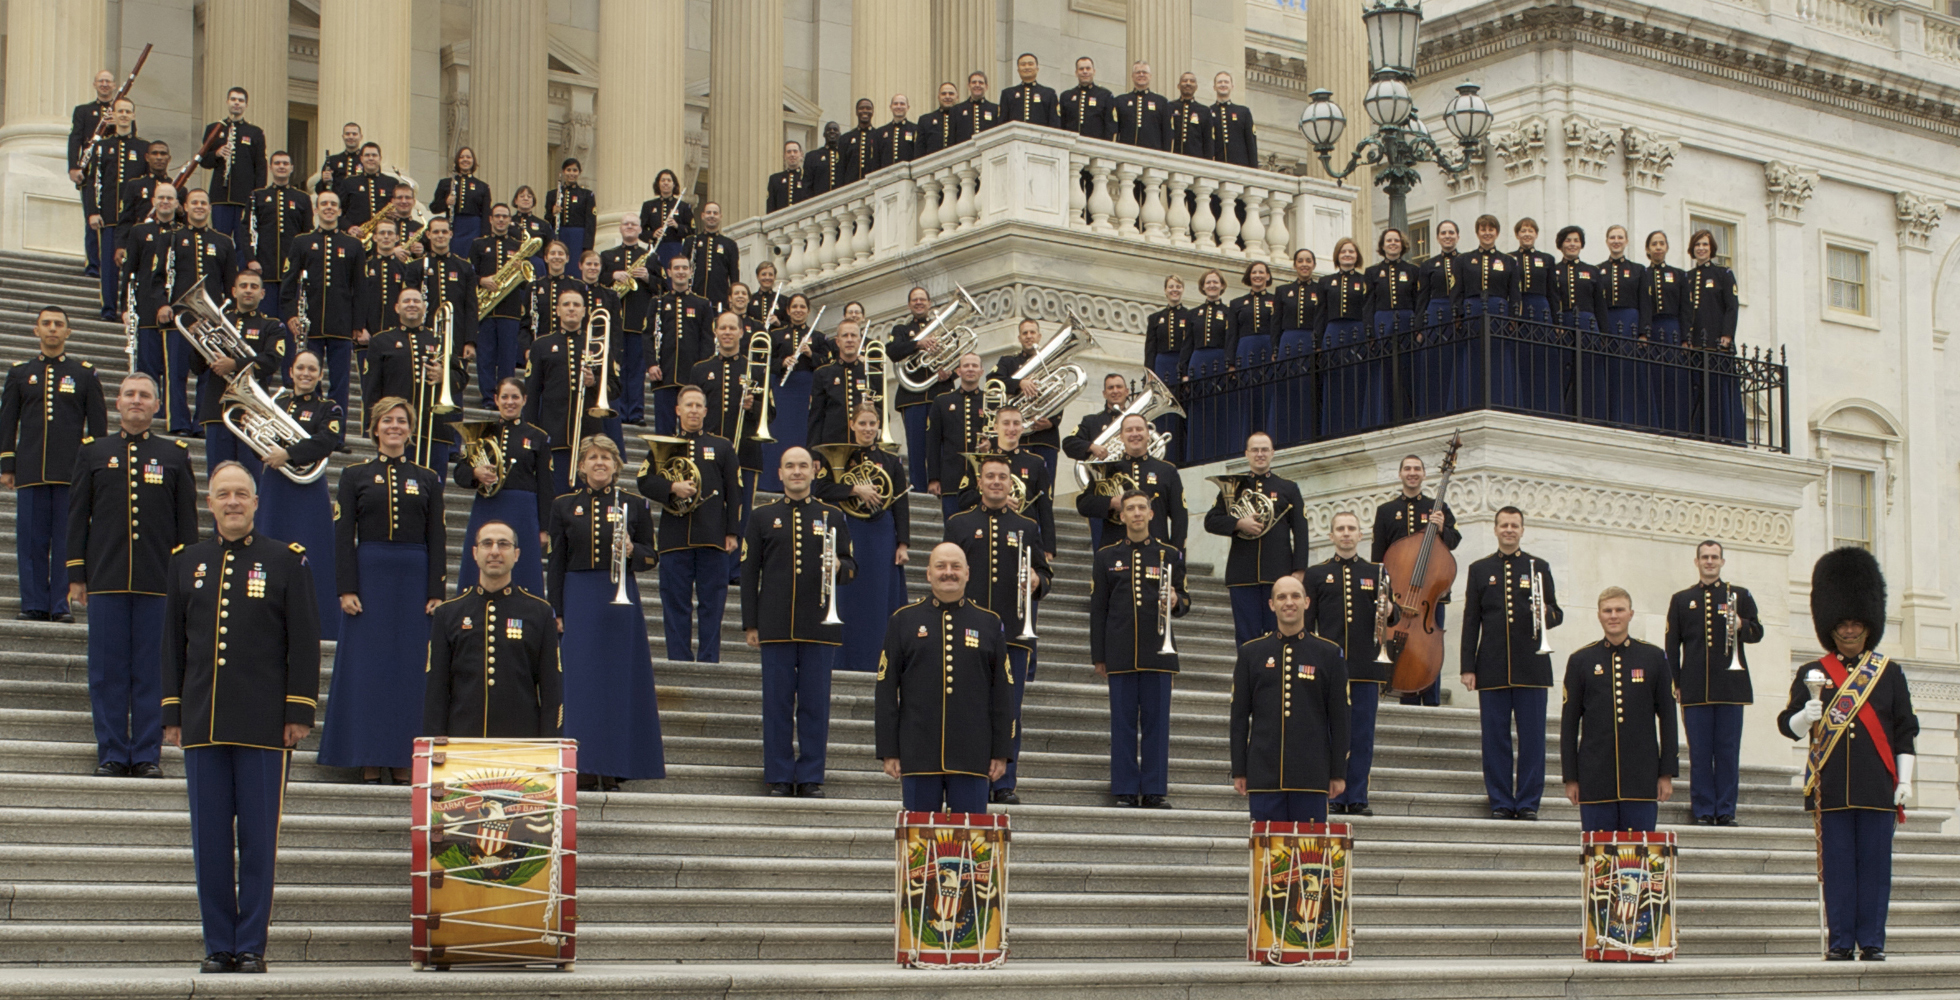 Free priority tickets still available for Nov. 12 U.S. Army Band concert